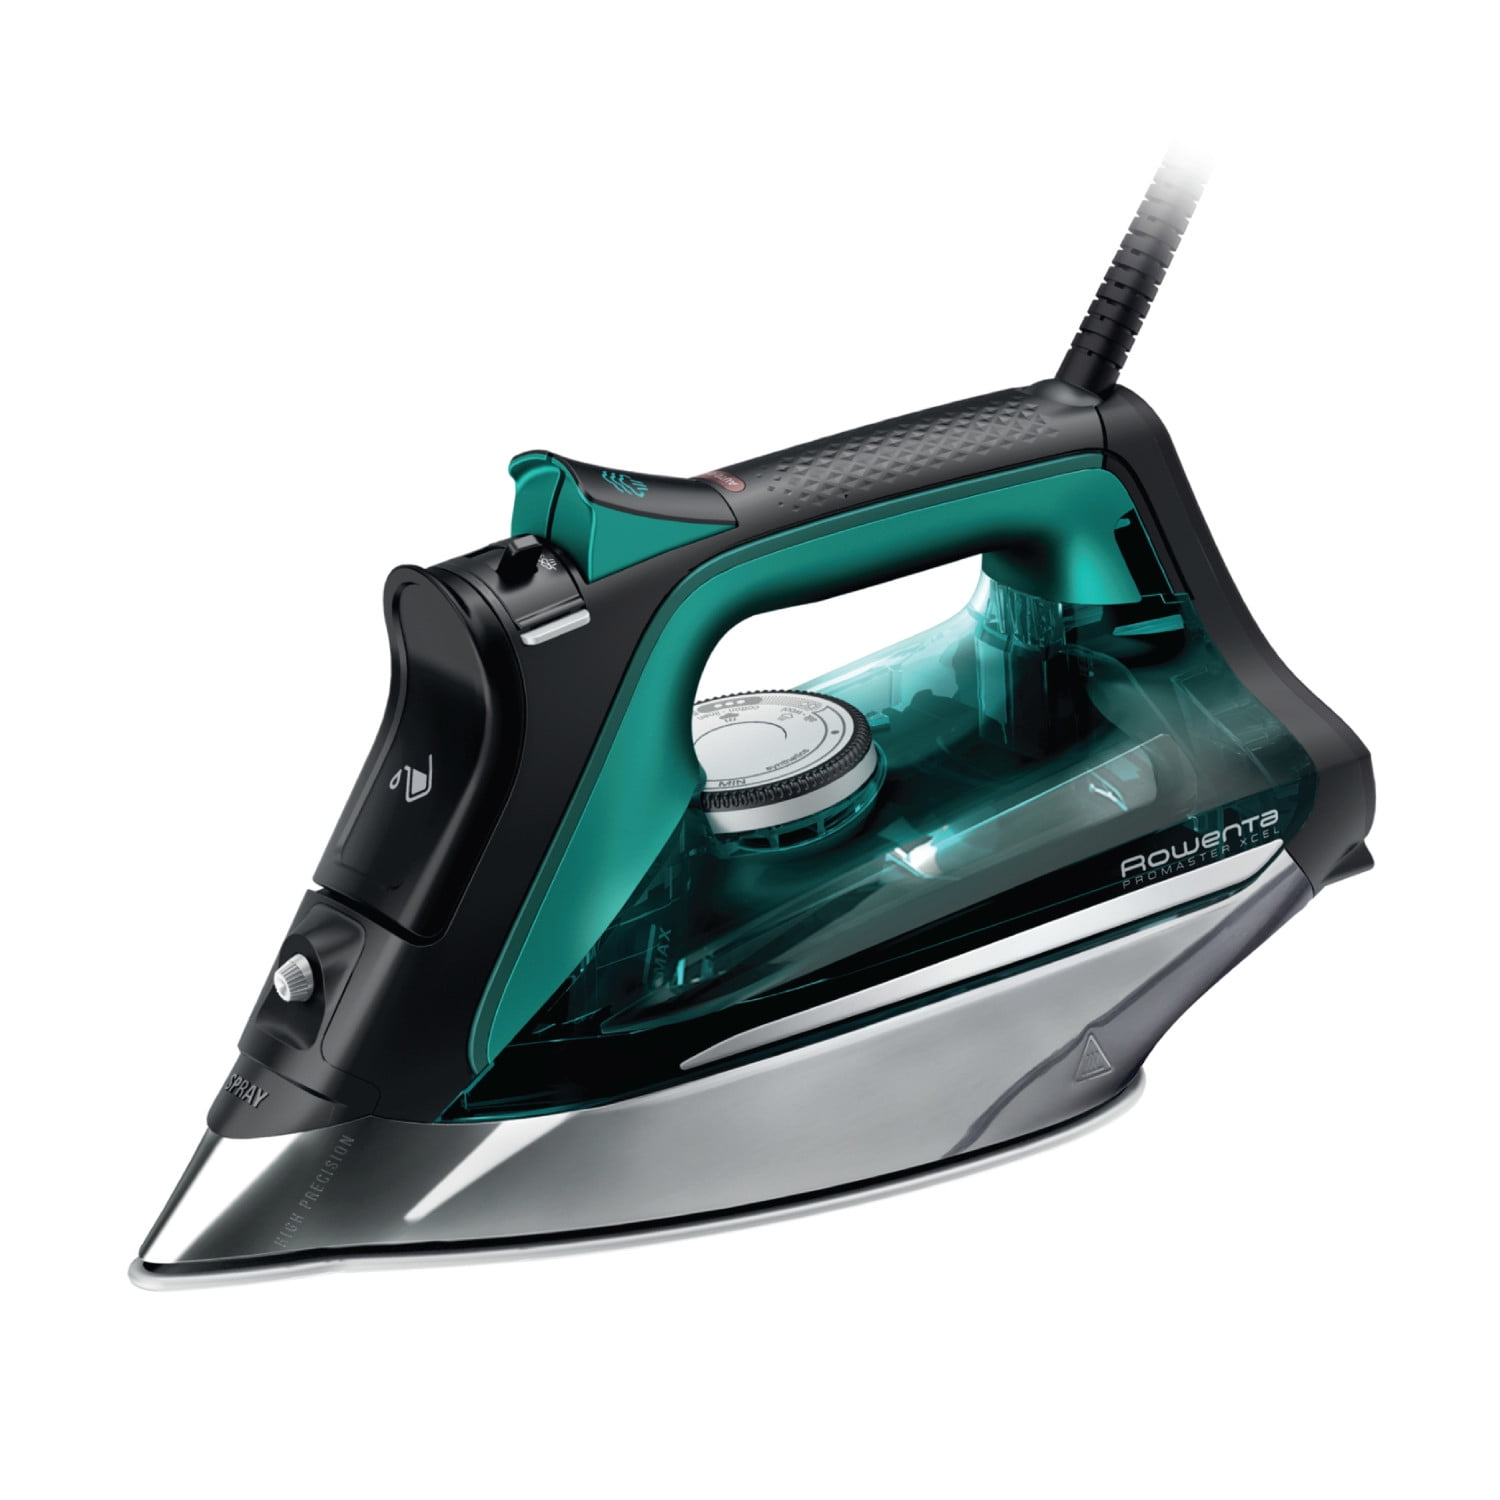 deal: Our favorite PurSteam Steam Iron is on sale for less